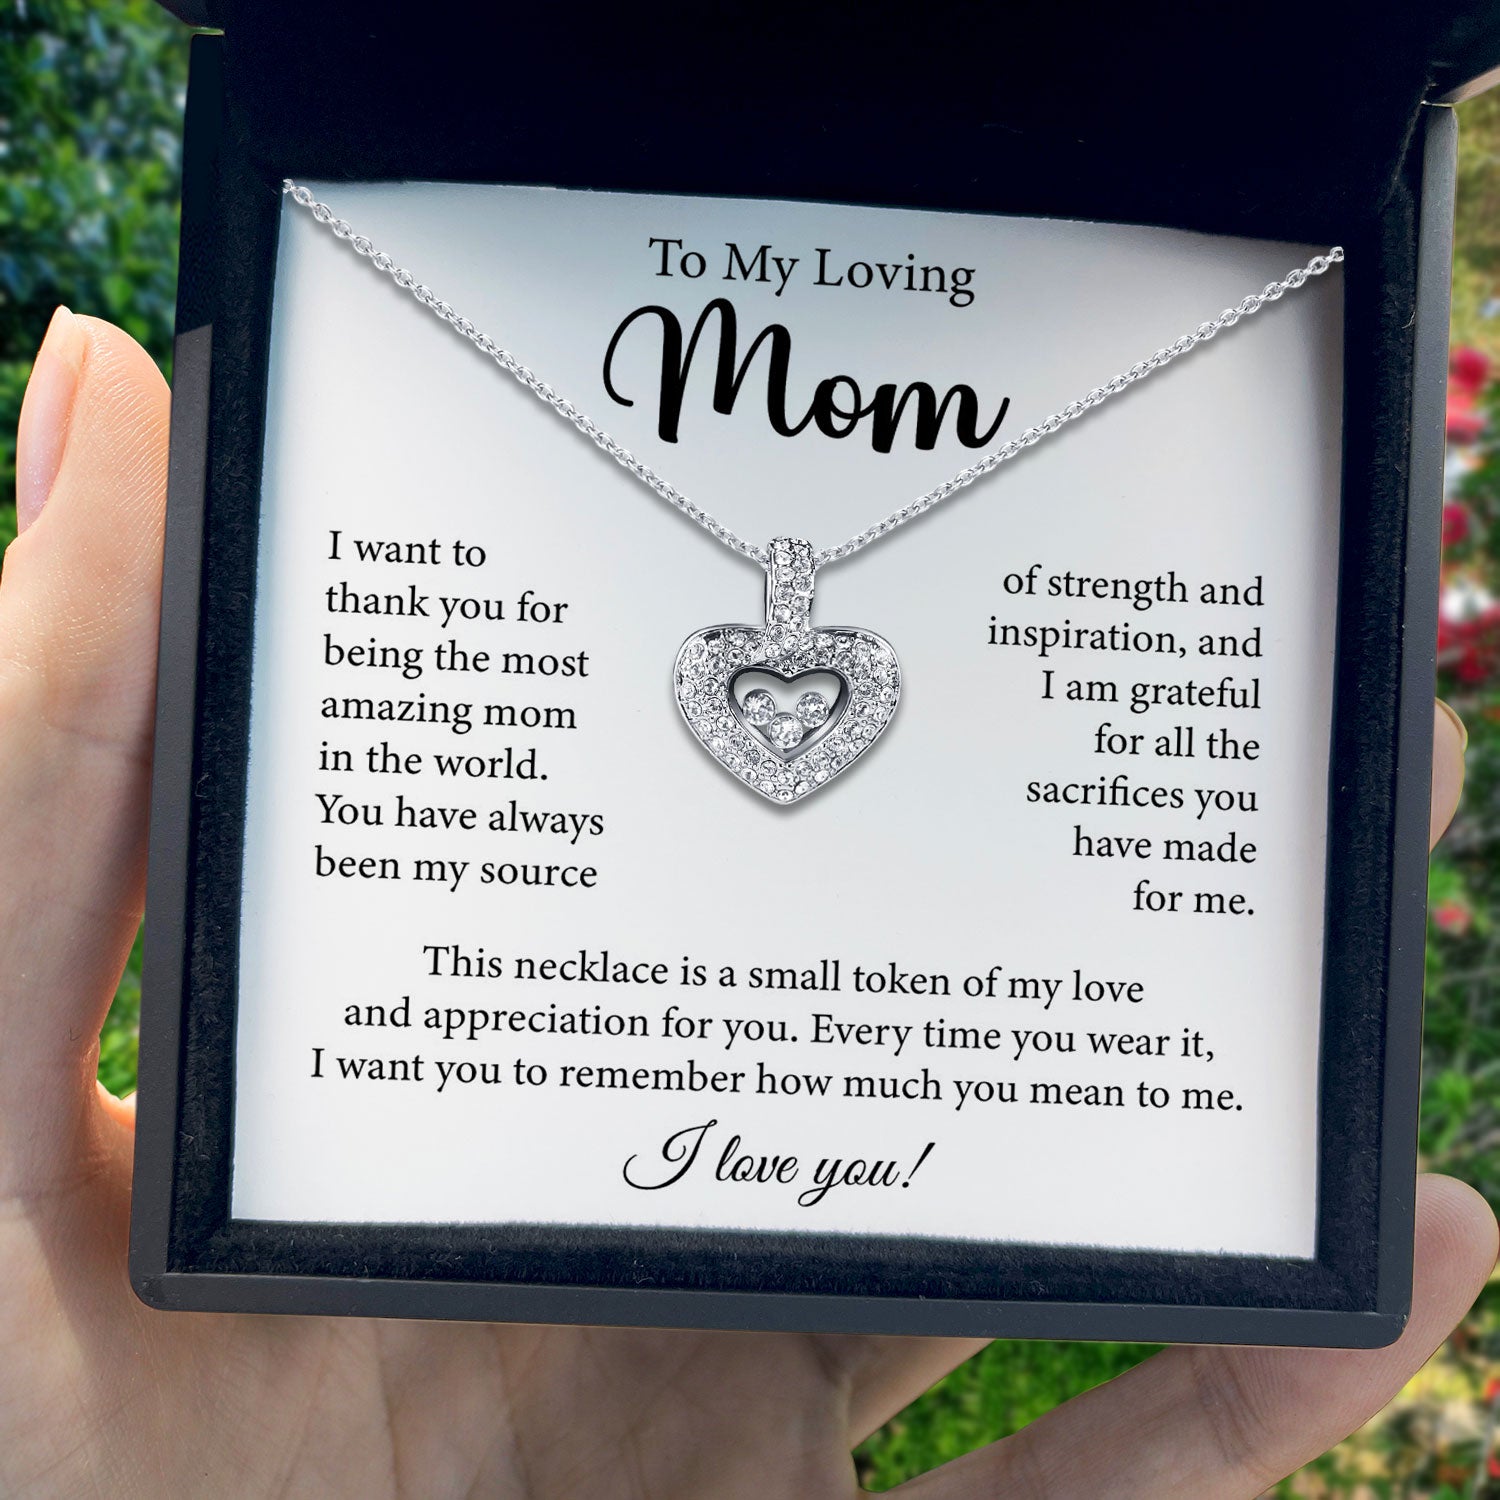 To My Loving Mom - I Love You Mom - Tryndi Floating Heart Necklace